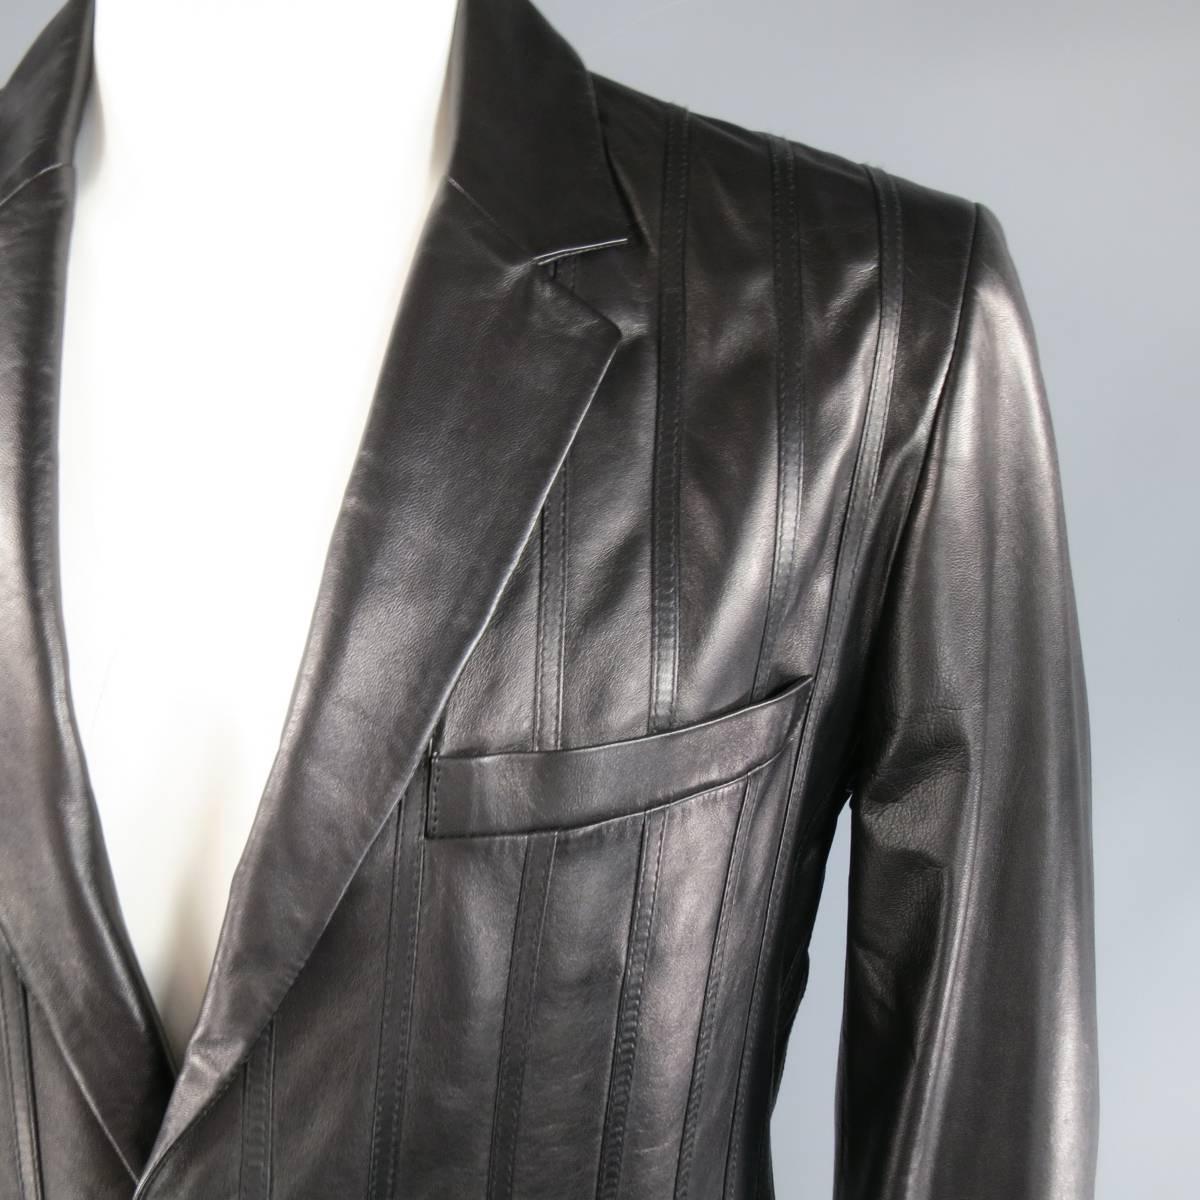 VERSUS by VERSACE sport coat in a soft black leather featuring a slim notch lapel, two button closure, flap pockets, button cuffs, and leather pinstripe applique's along the front. Made in Italy.
 
Excellent Pre-Owned Condition.
Marked: 40/54
